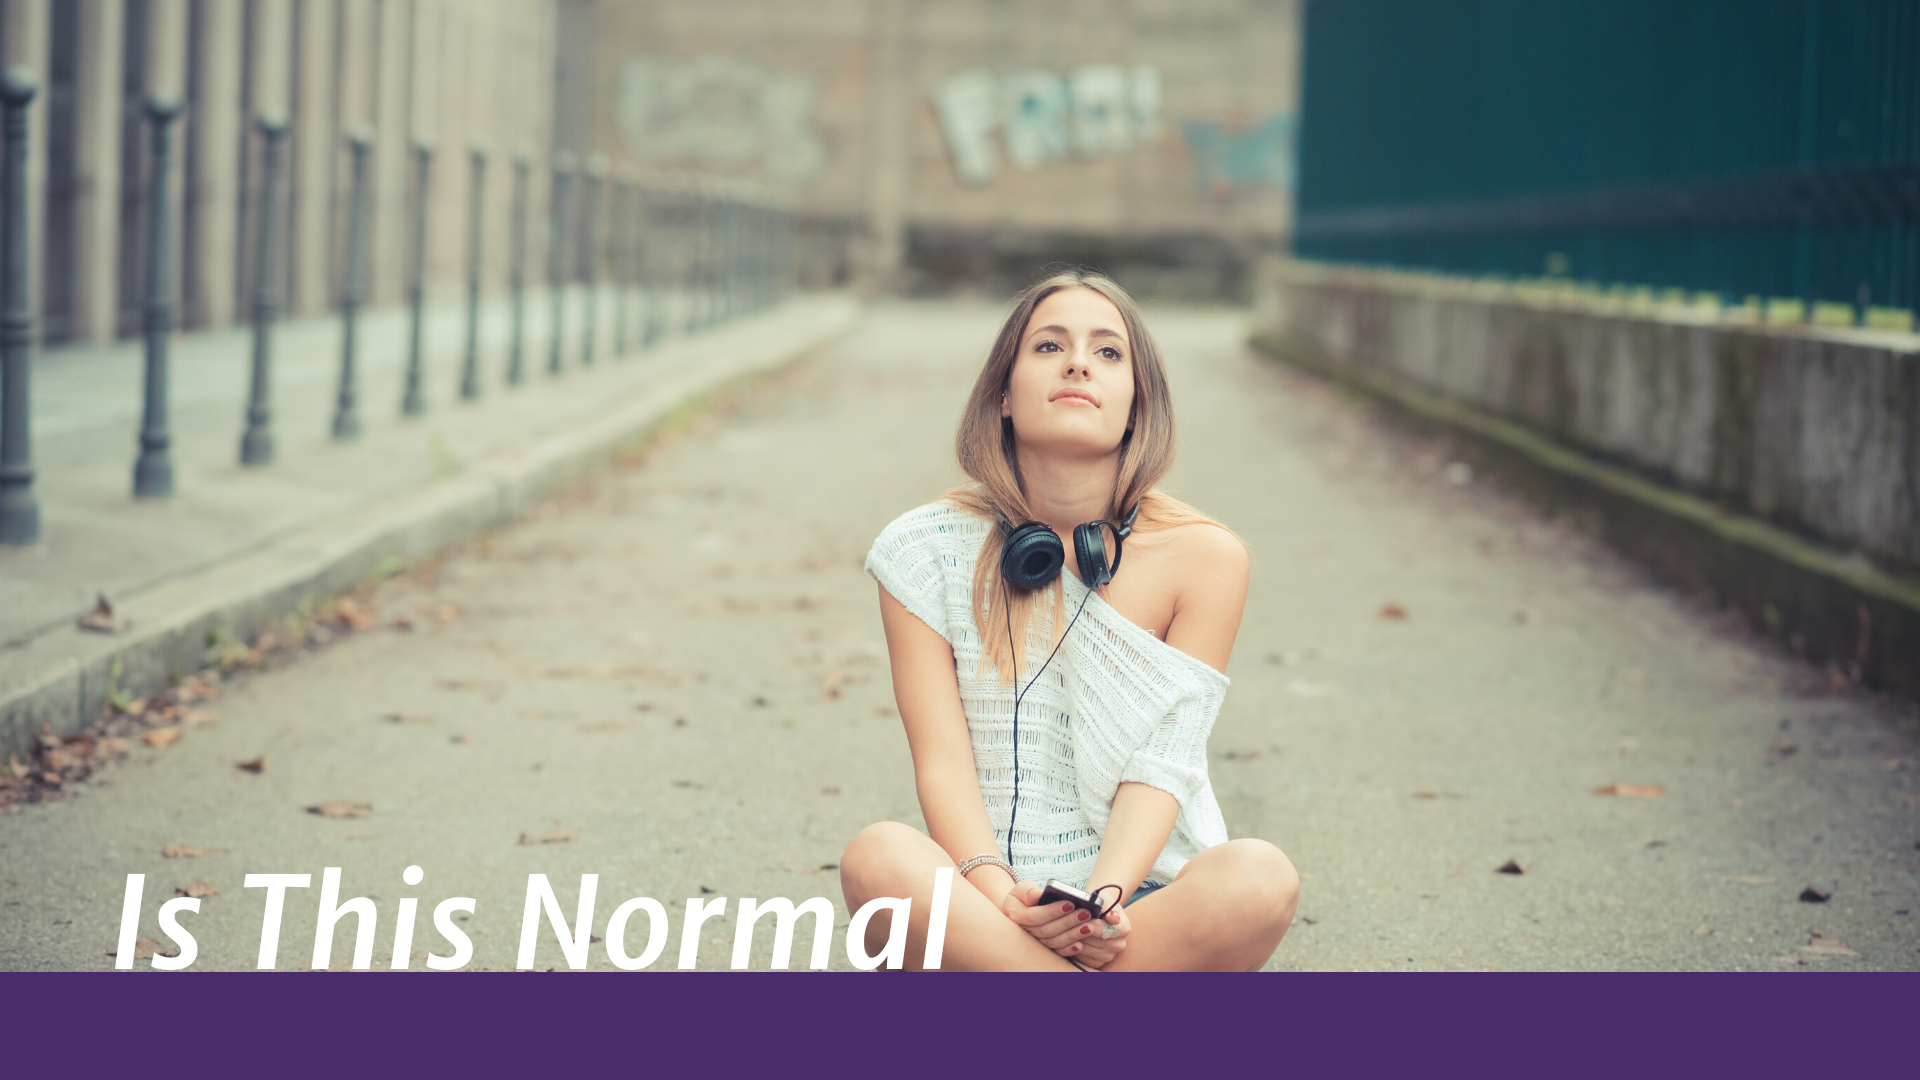 Is Substance Use a Part of “Normal” Teen Behavior?